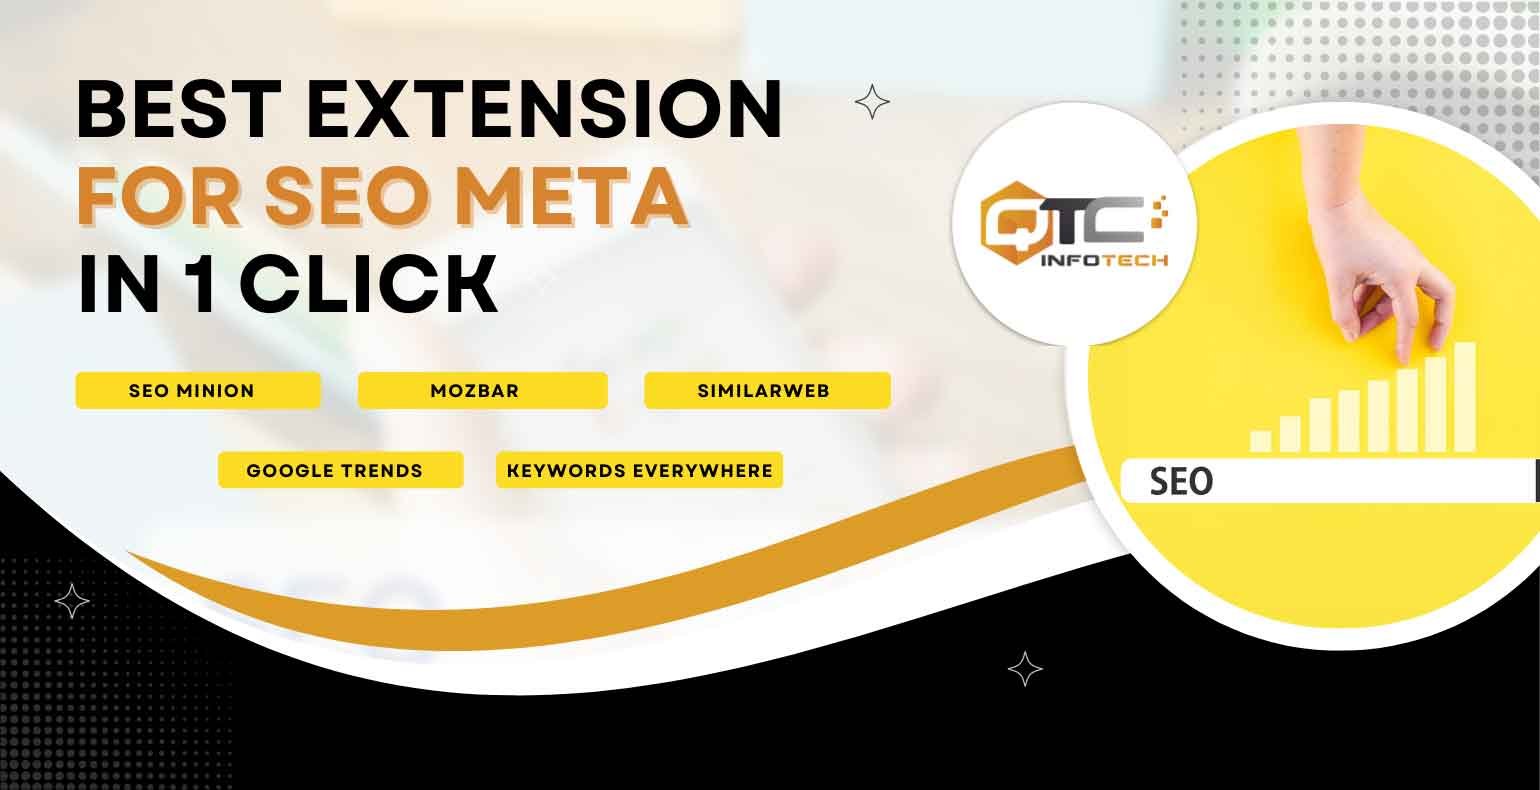 5 Best Extensions For SEO Meta In 1 Click